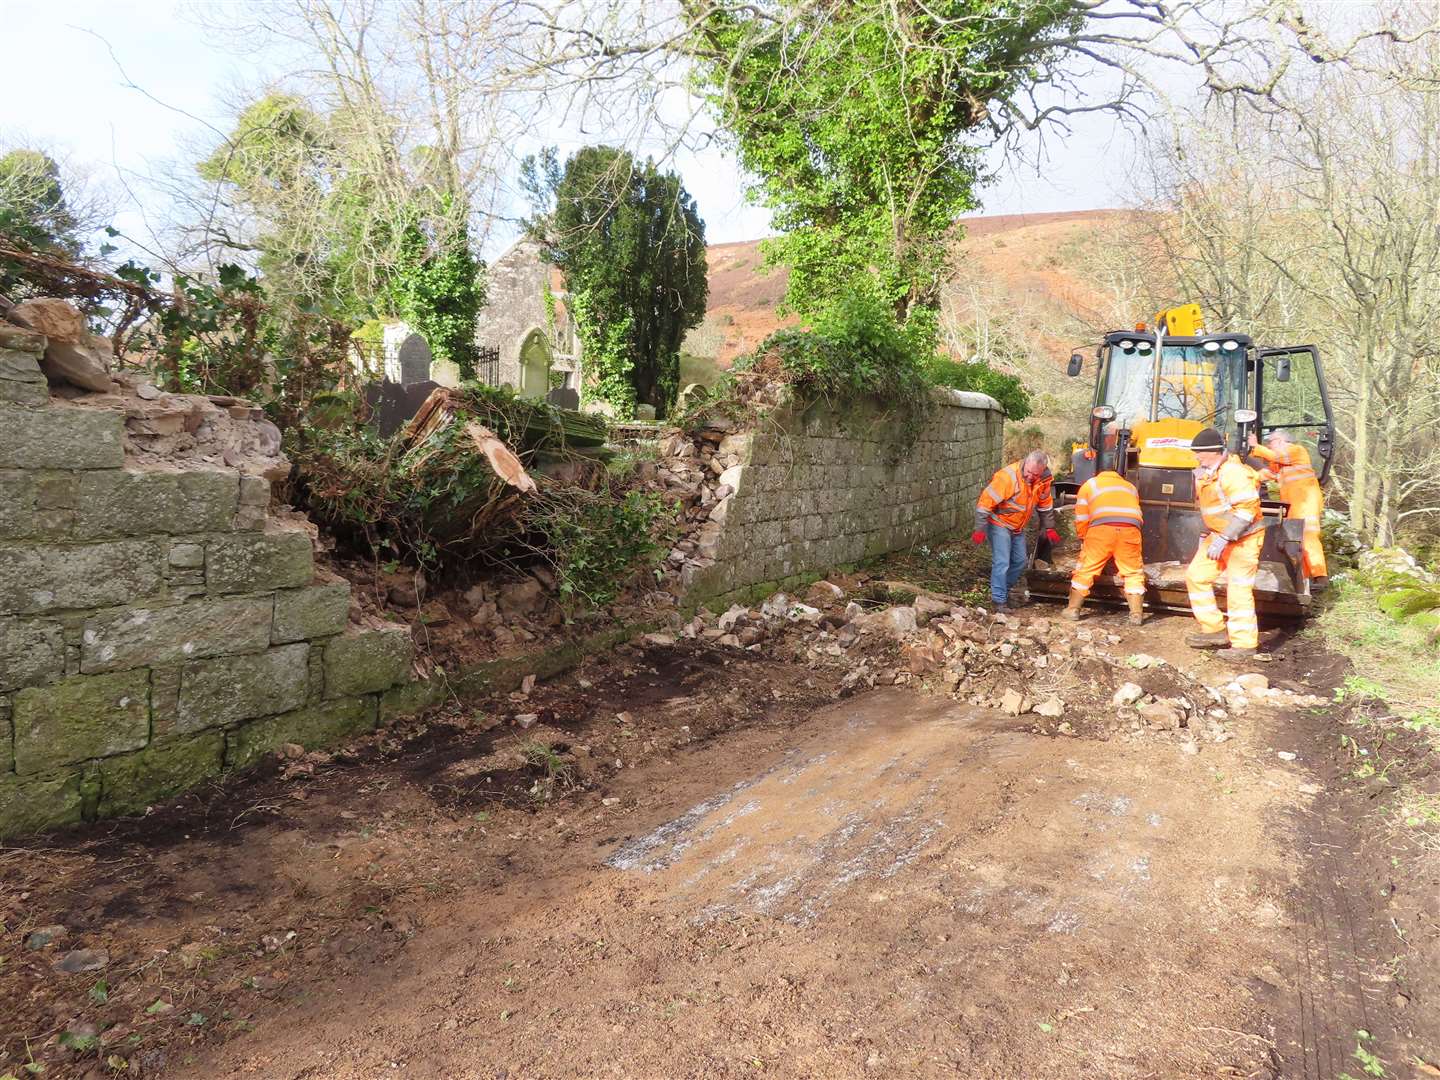 Highland Council roads department removed the masonry on Monday morning